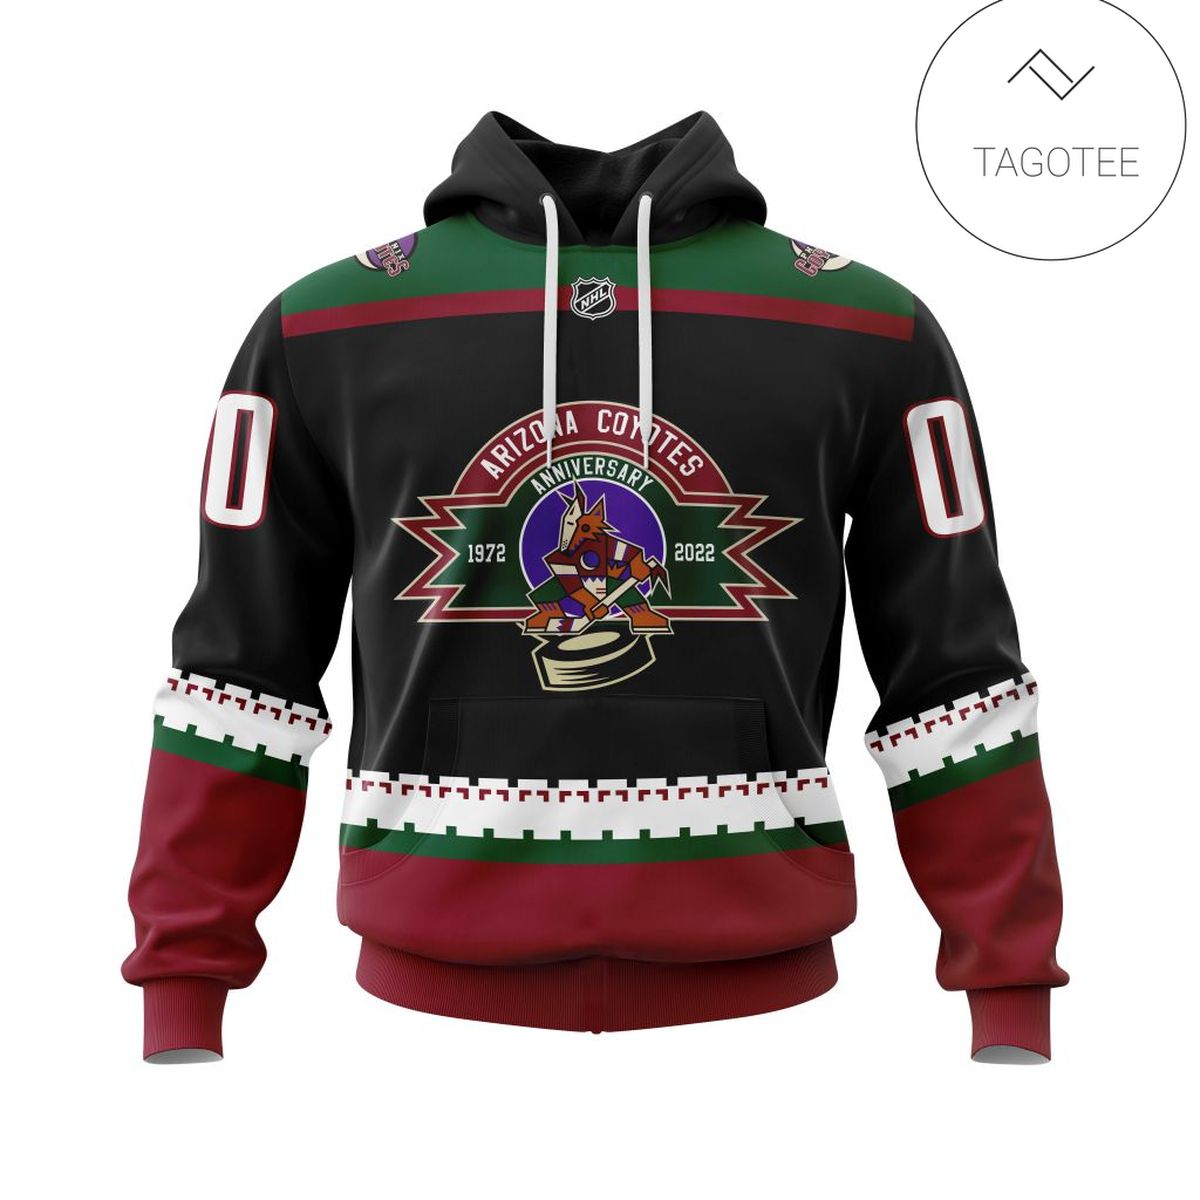 Personalized Arizona Coyotes Specialized 2022 Concepts With 50 Years Anniversary Hoodie